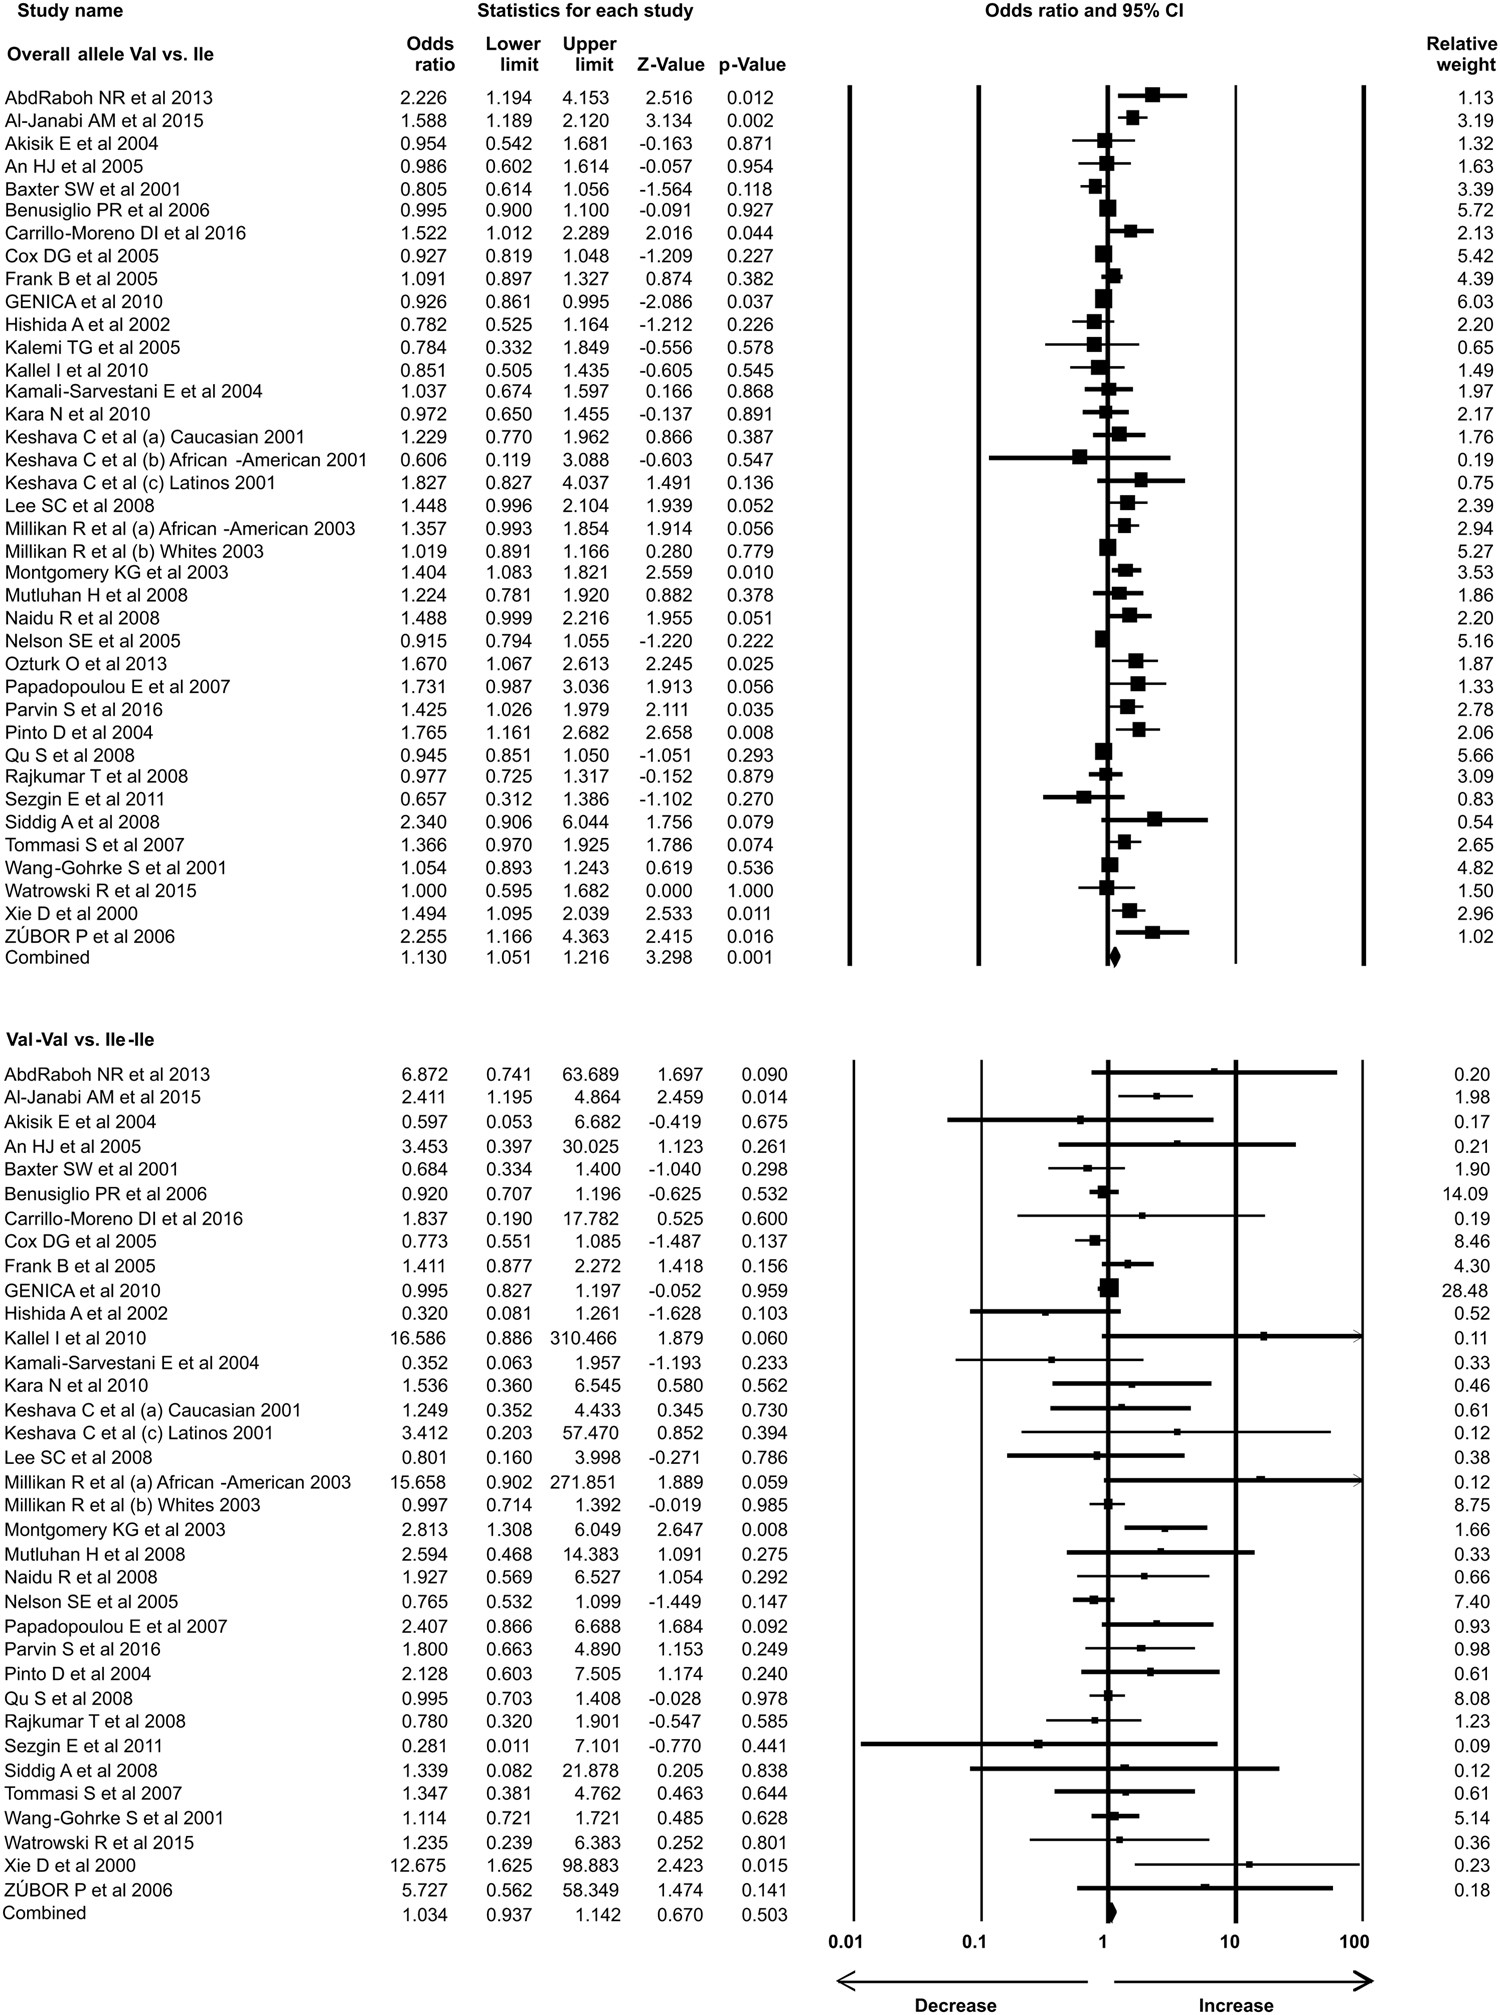 Her2 Ile655Val polymorphism and its association with breast cancer risk: an  updated meta-analysis of case-control studies | Scientific Reports